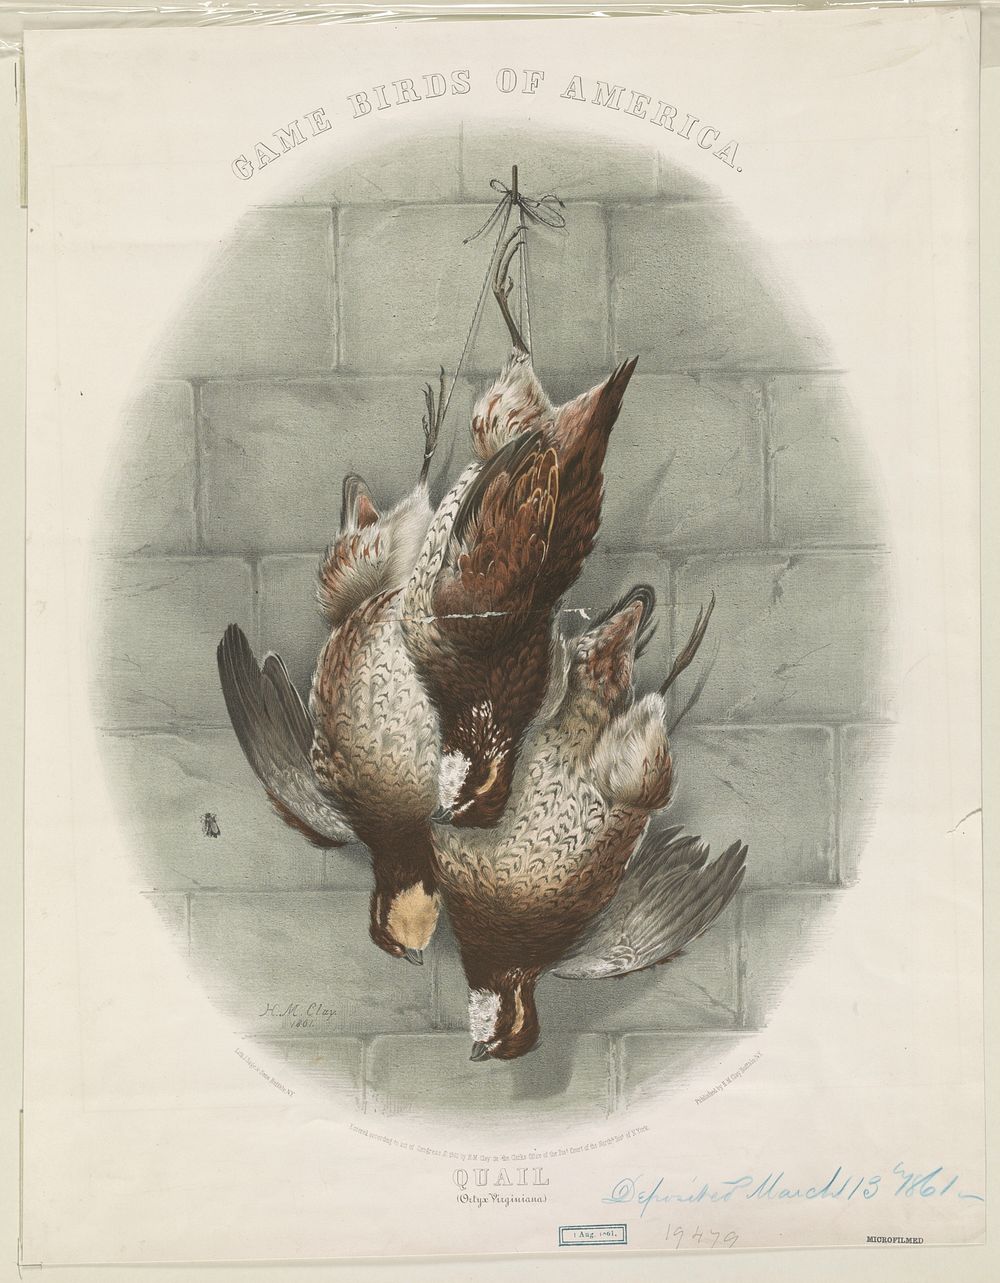 Game birds of America. Quail (Ortyx Virginiana) (1861). Original from the Library of Congress.